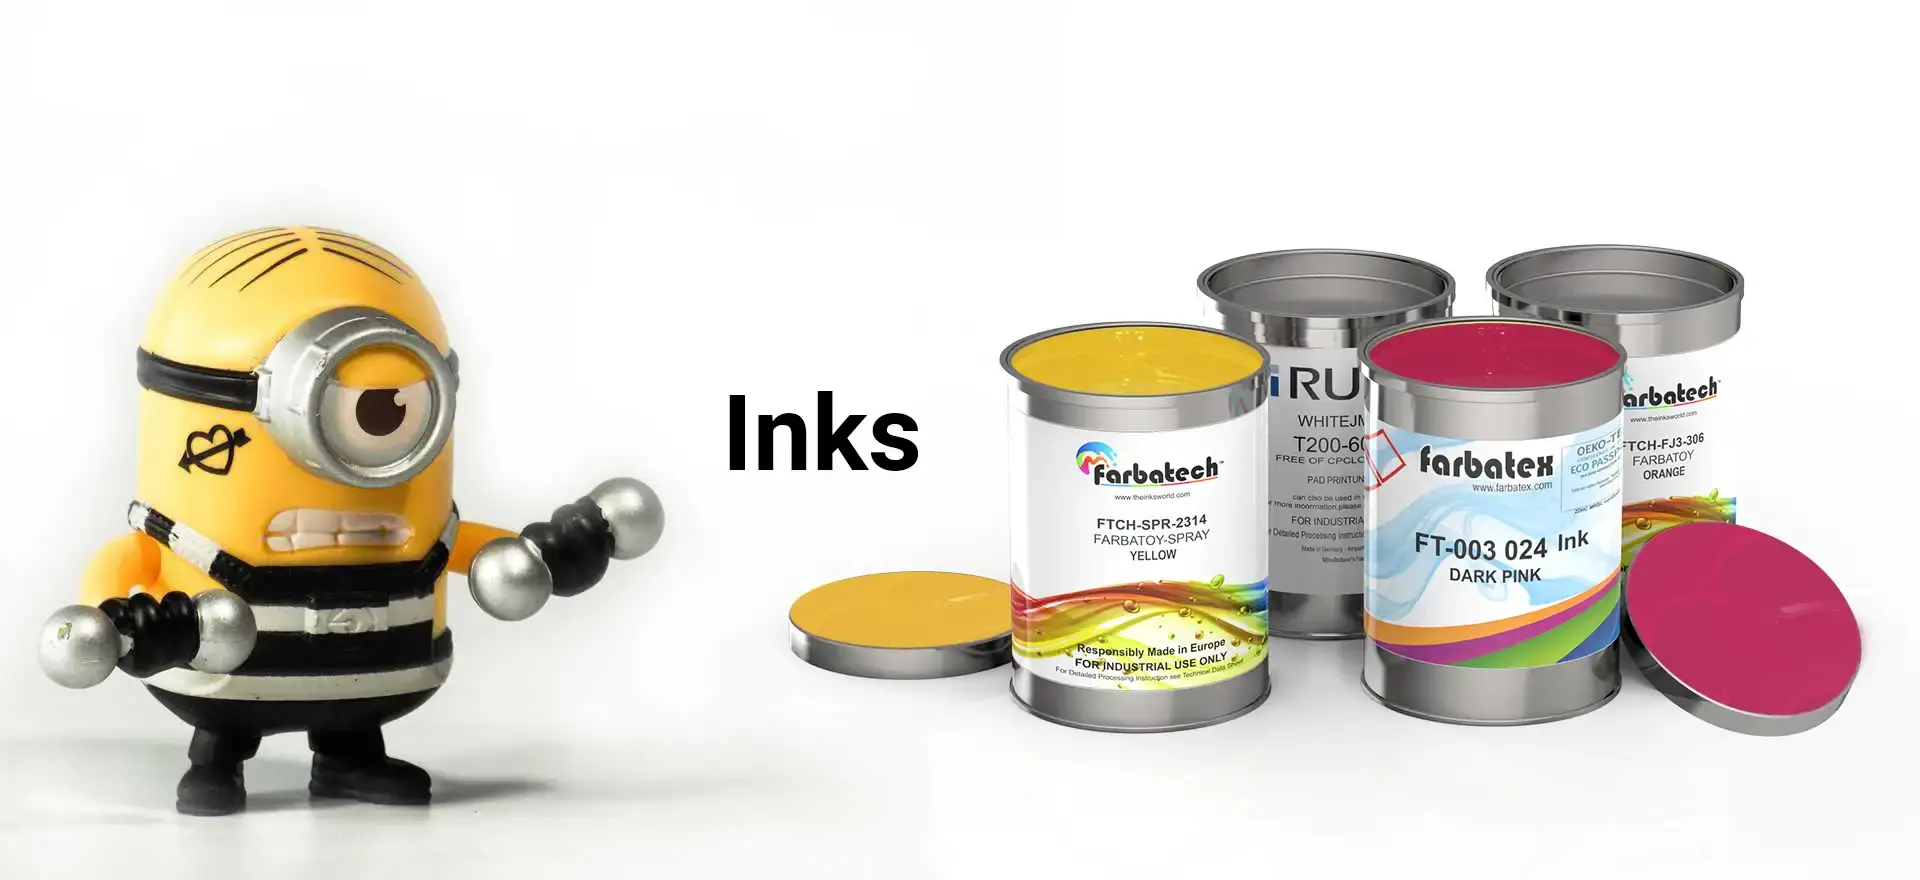 Coatings, Paints, and Inks